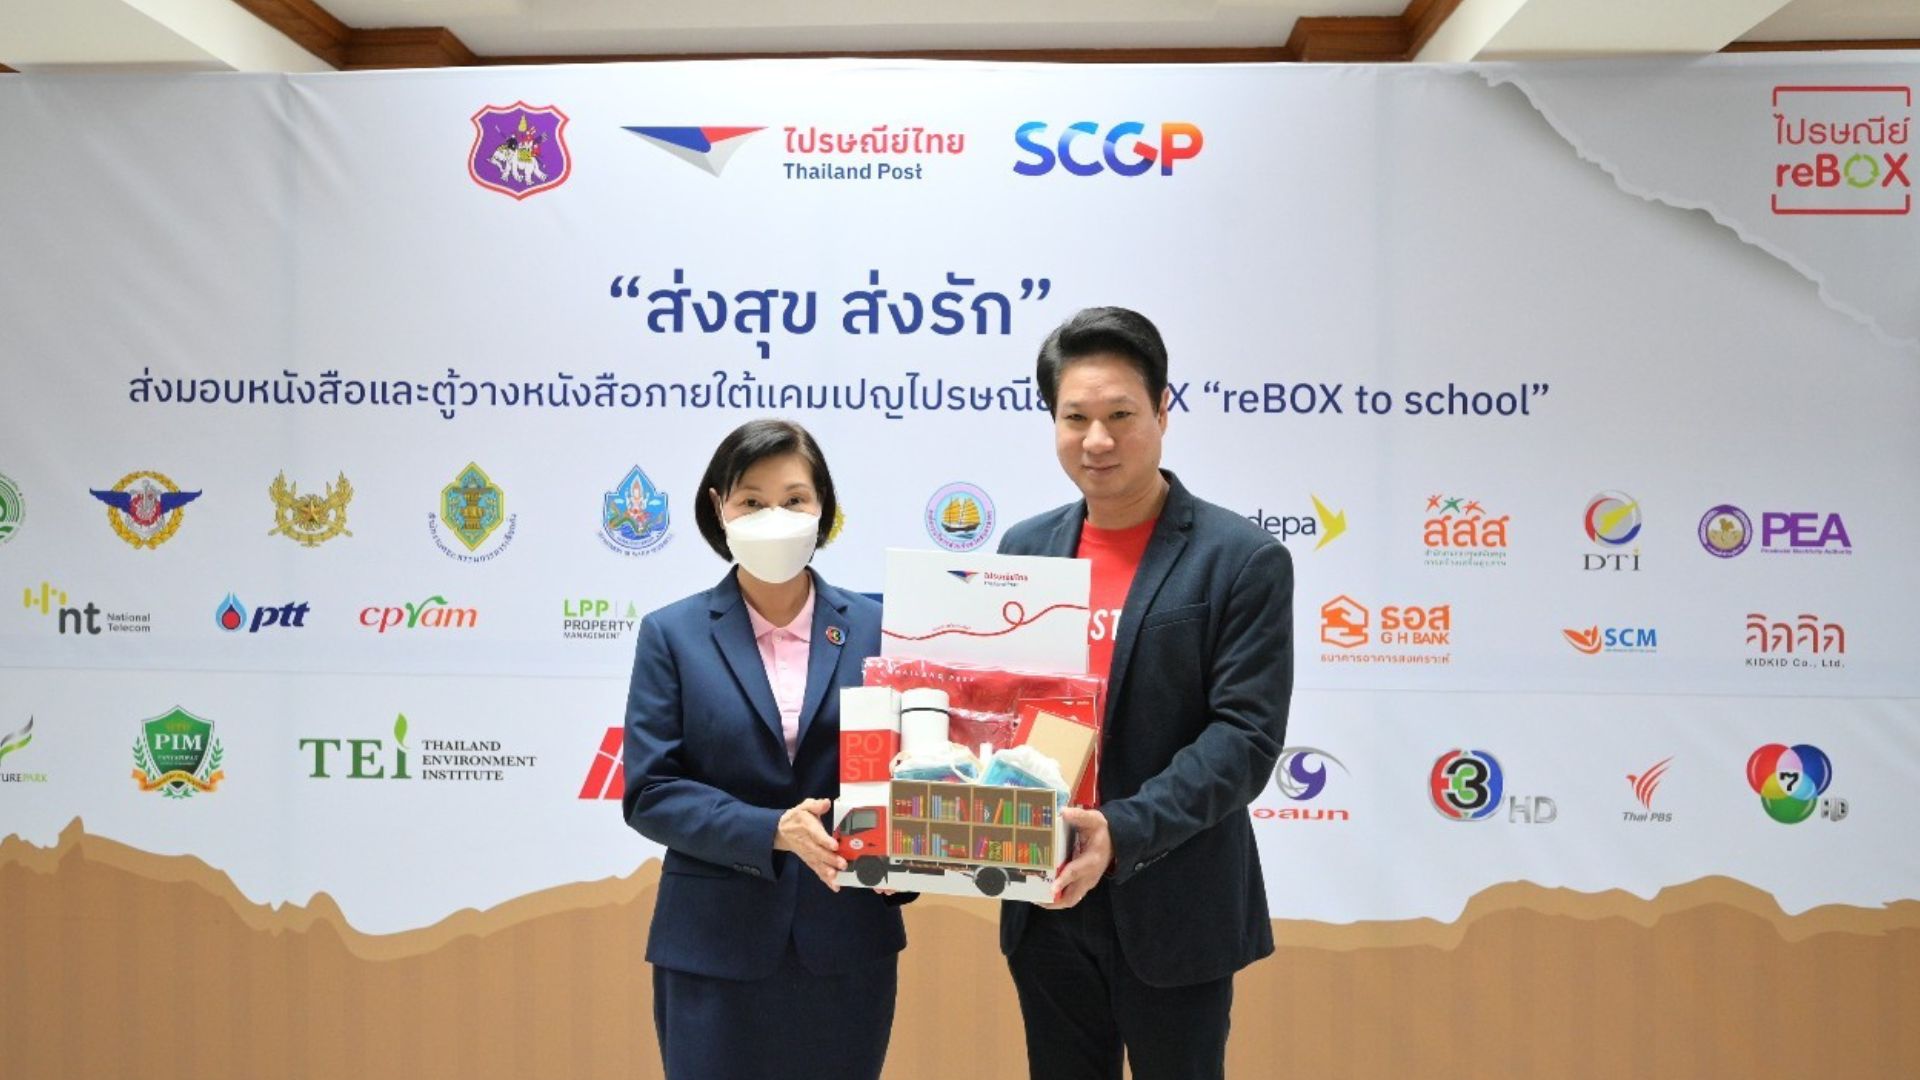 Channel 3 and Alliance Unite to Deliver “Bookshelves” under the Campaign  “reBOX to School” to be 2023 New Year gifts to Border Patrol Police Schools across Thailand